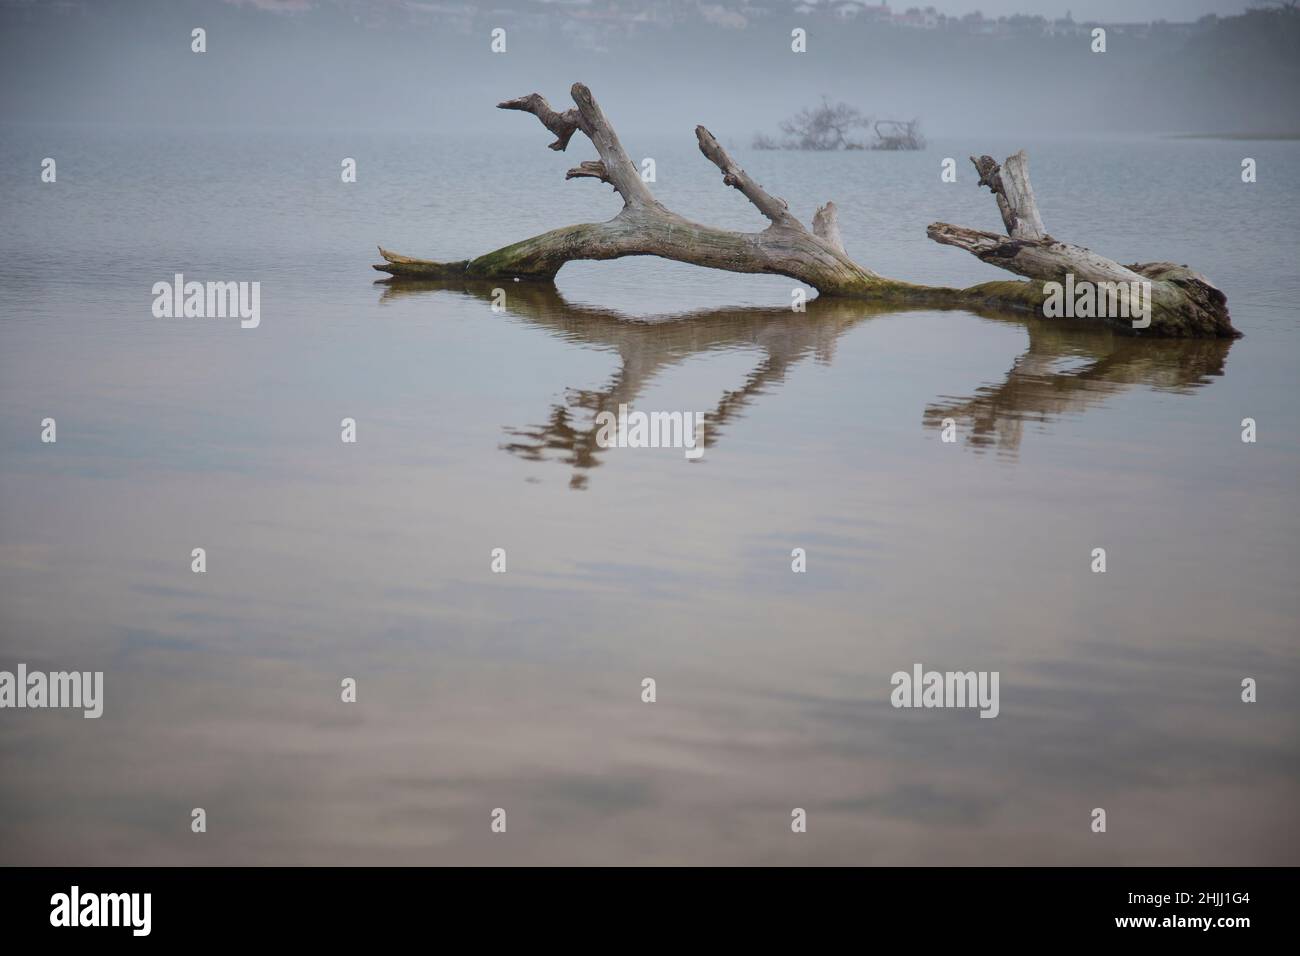 An old tree flouting in a lake. Stock Photo